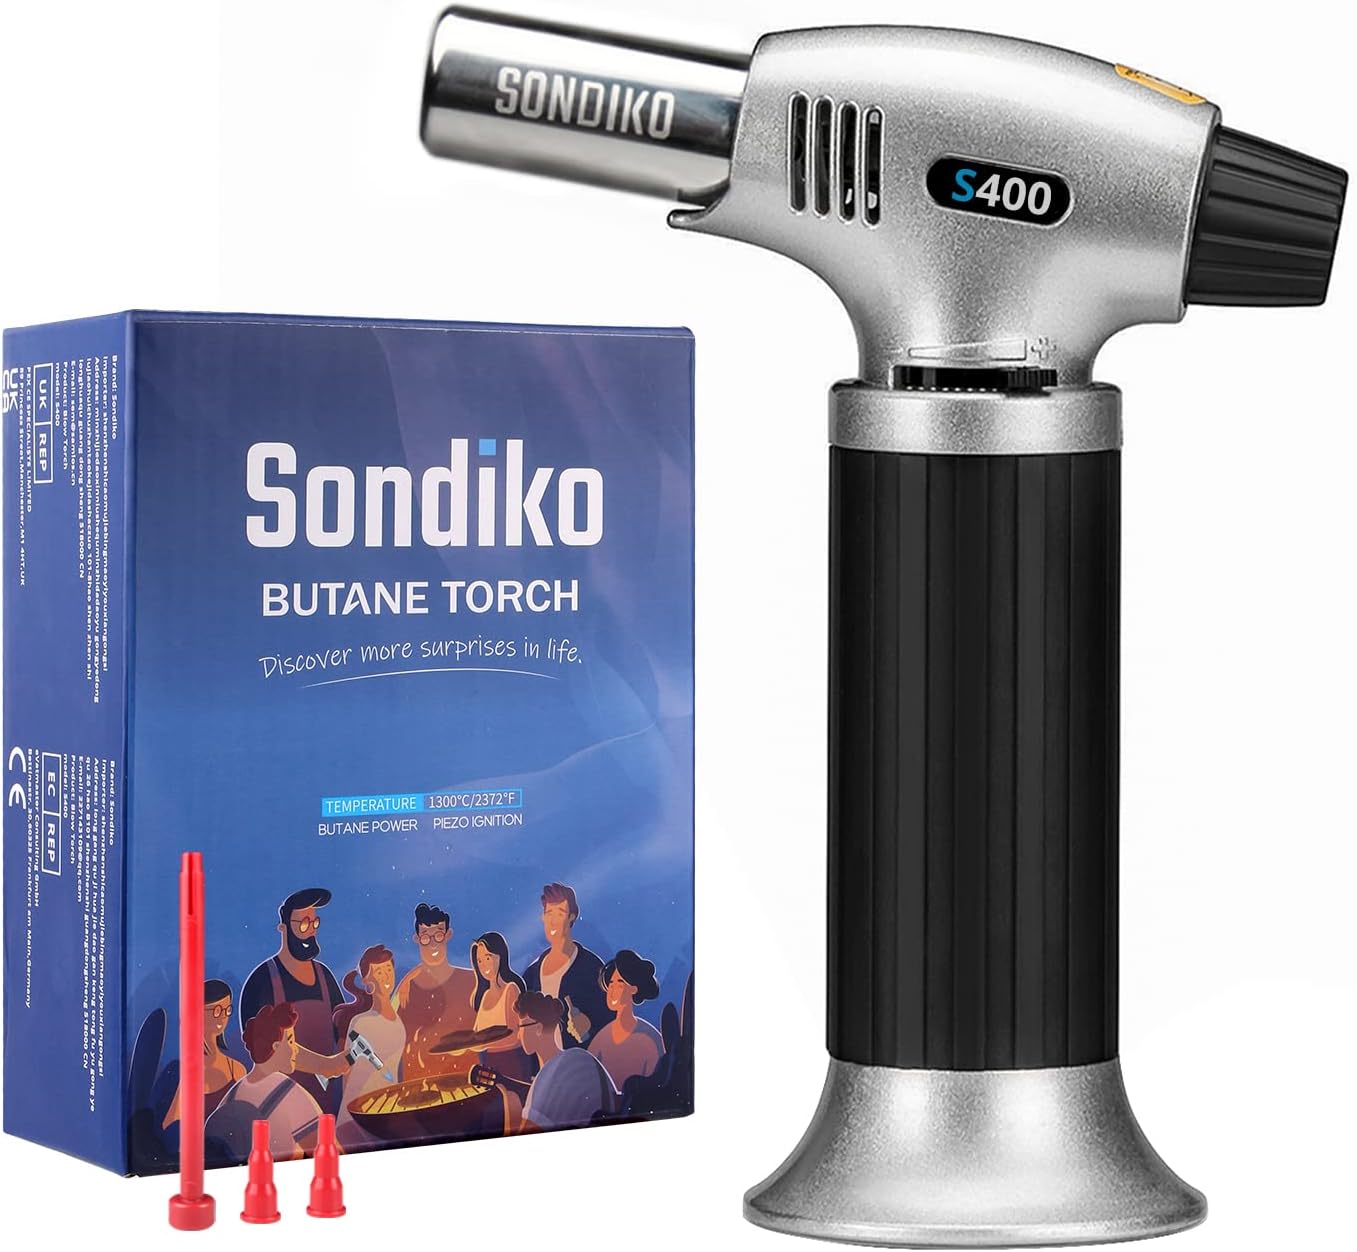 Sondiko Butane Torch S400, Refillable Kitchen Lighter, Fit All Butane Tanks Blow Torch with Safety Lock and Adjustable Flame for Desserts, Creme Brulee, and Baking—-4188